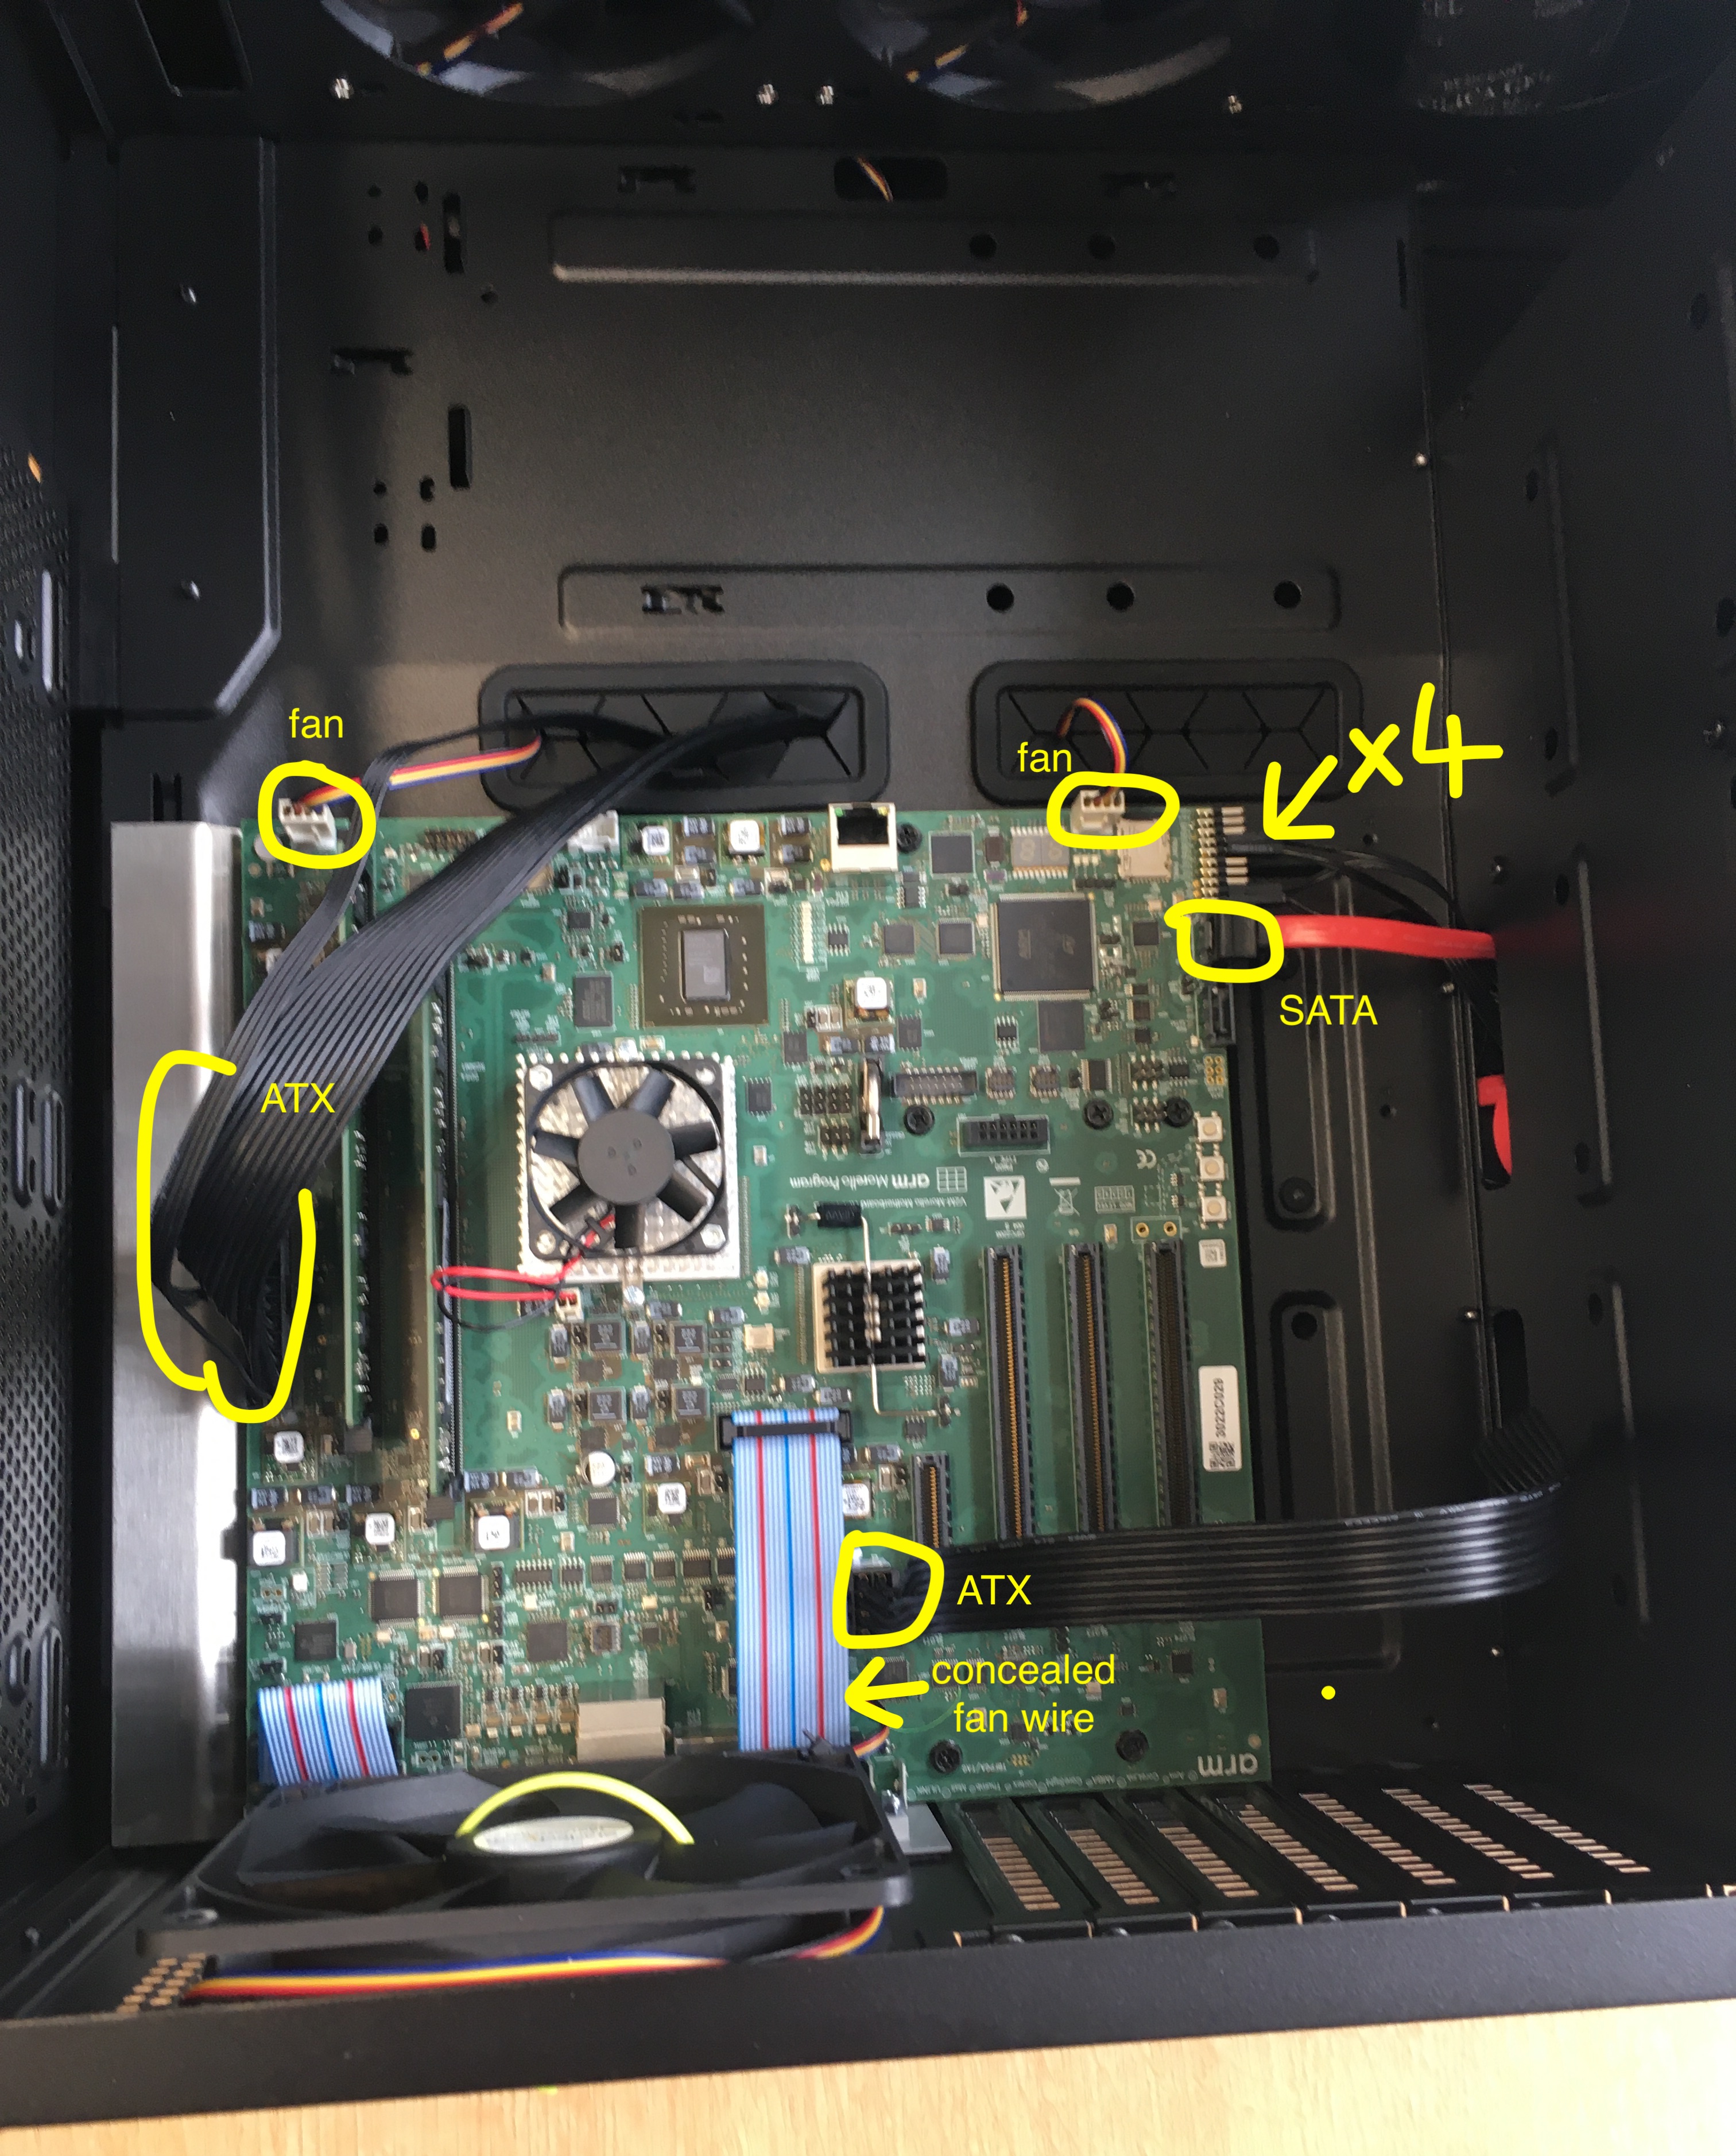 Wires to be disconnected from motherboard